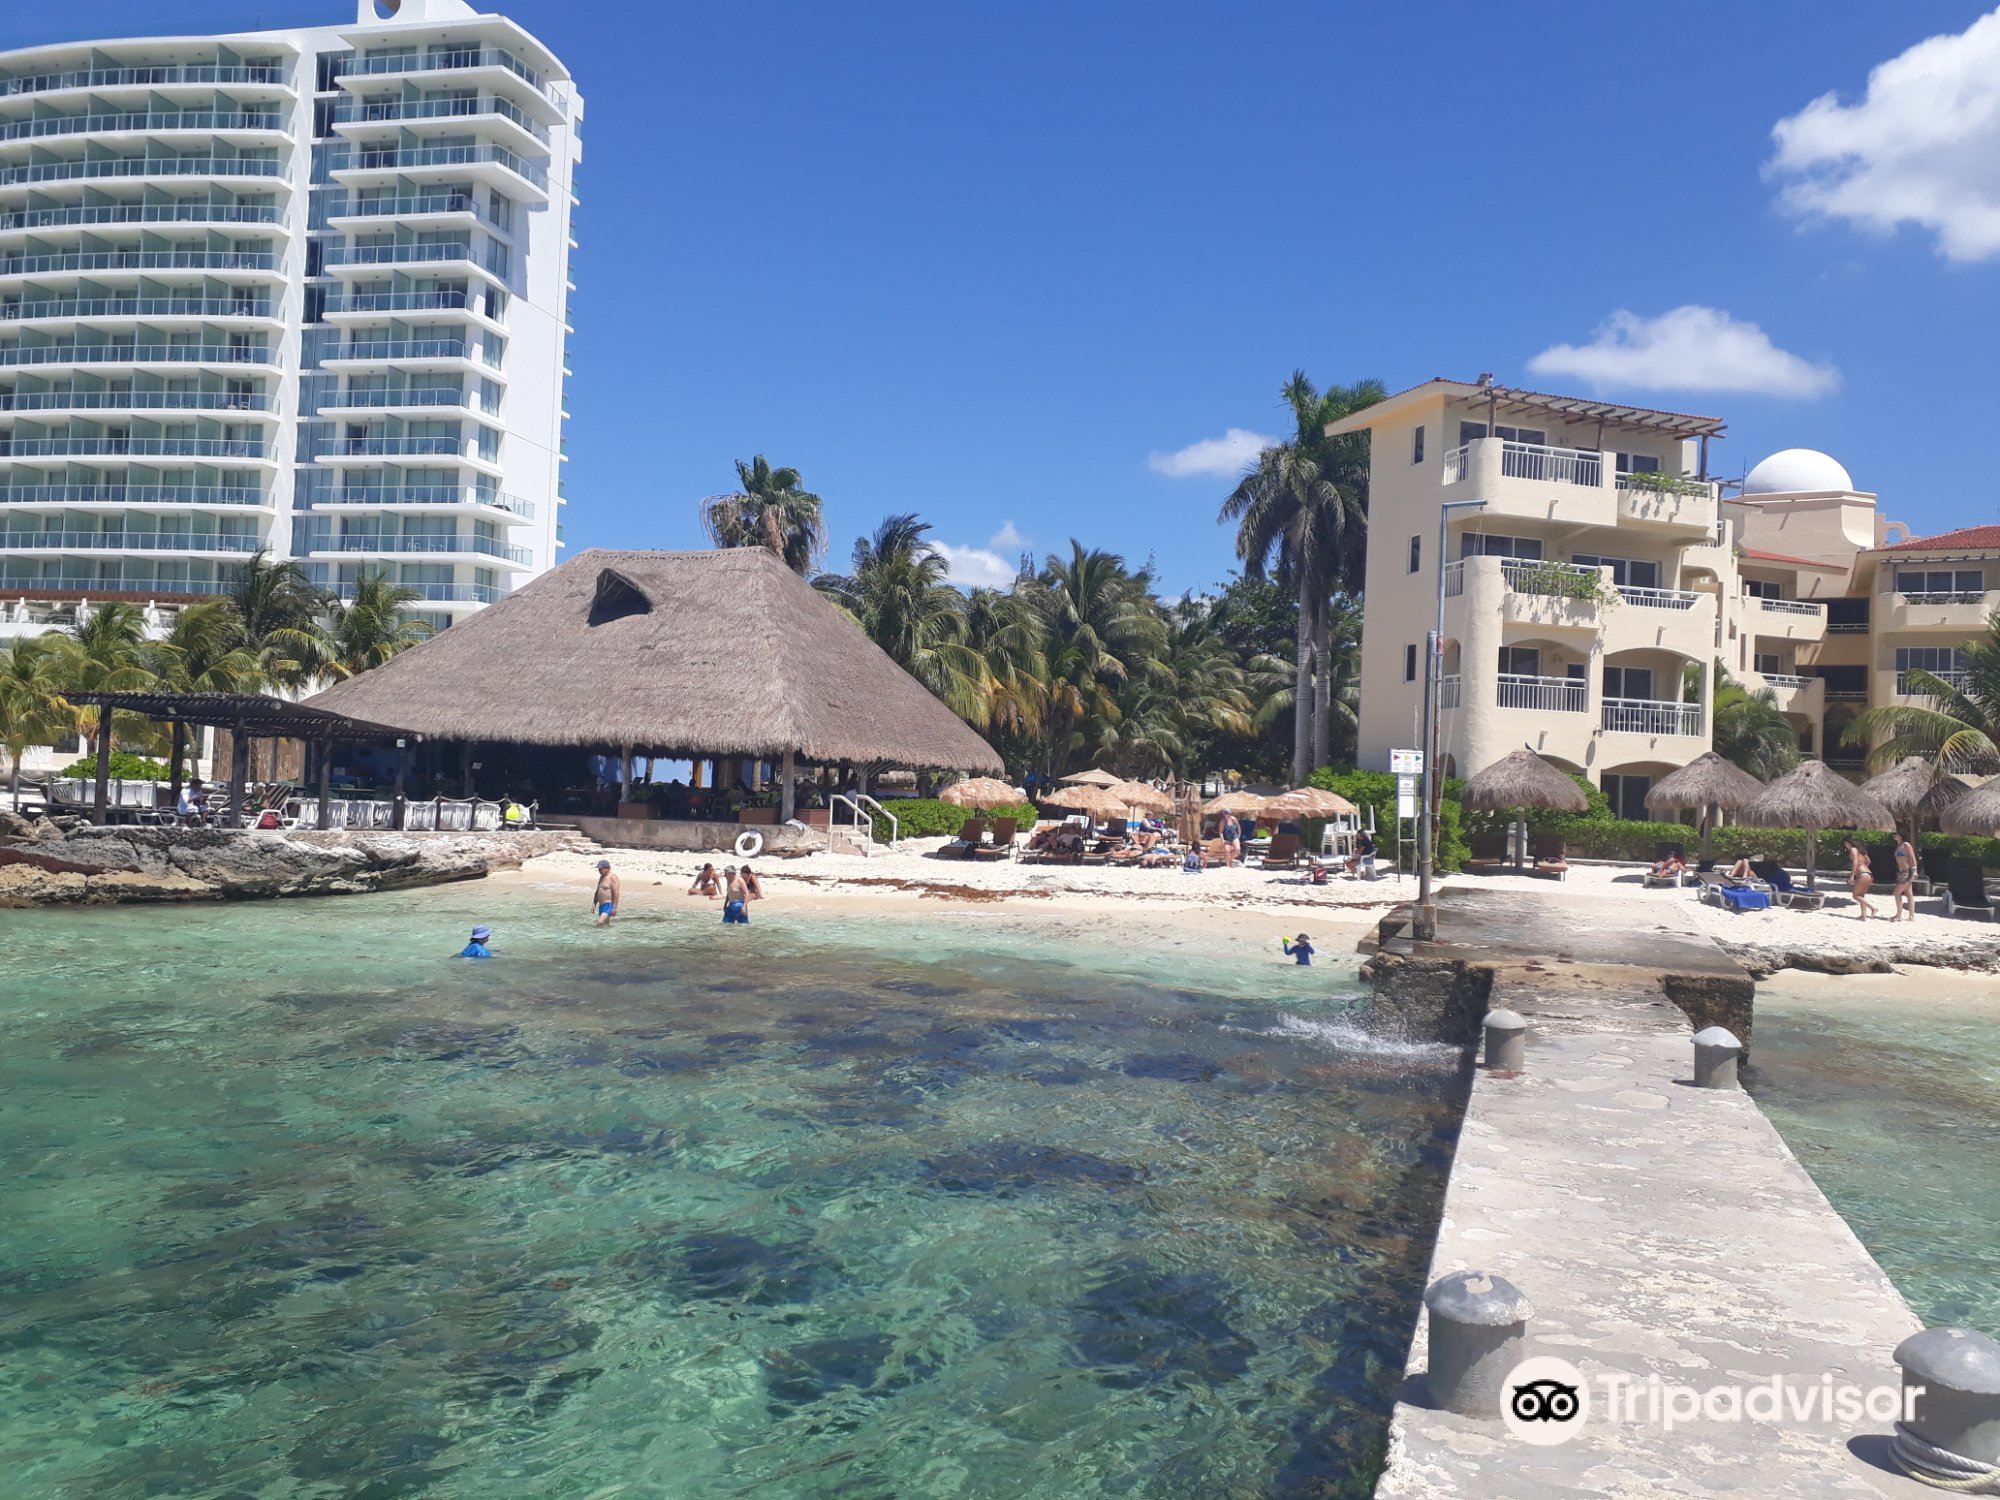 Playa azul cozumel mexico attraction reviews - Playa azul cozumel mexico  tickets - Playa azul cozumel mexico discounts - Playa azul cozumel mexico  transportation, address, opening hours - attractions, hotels, and food